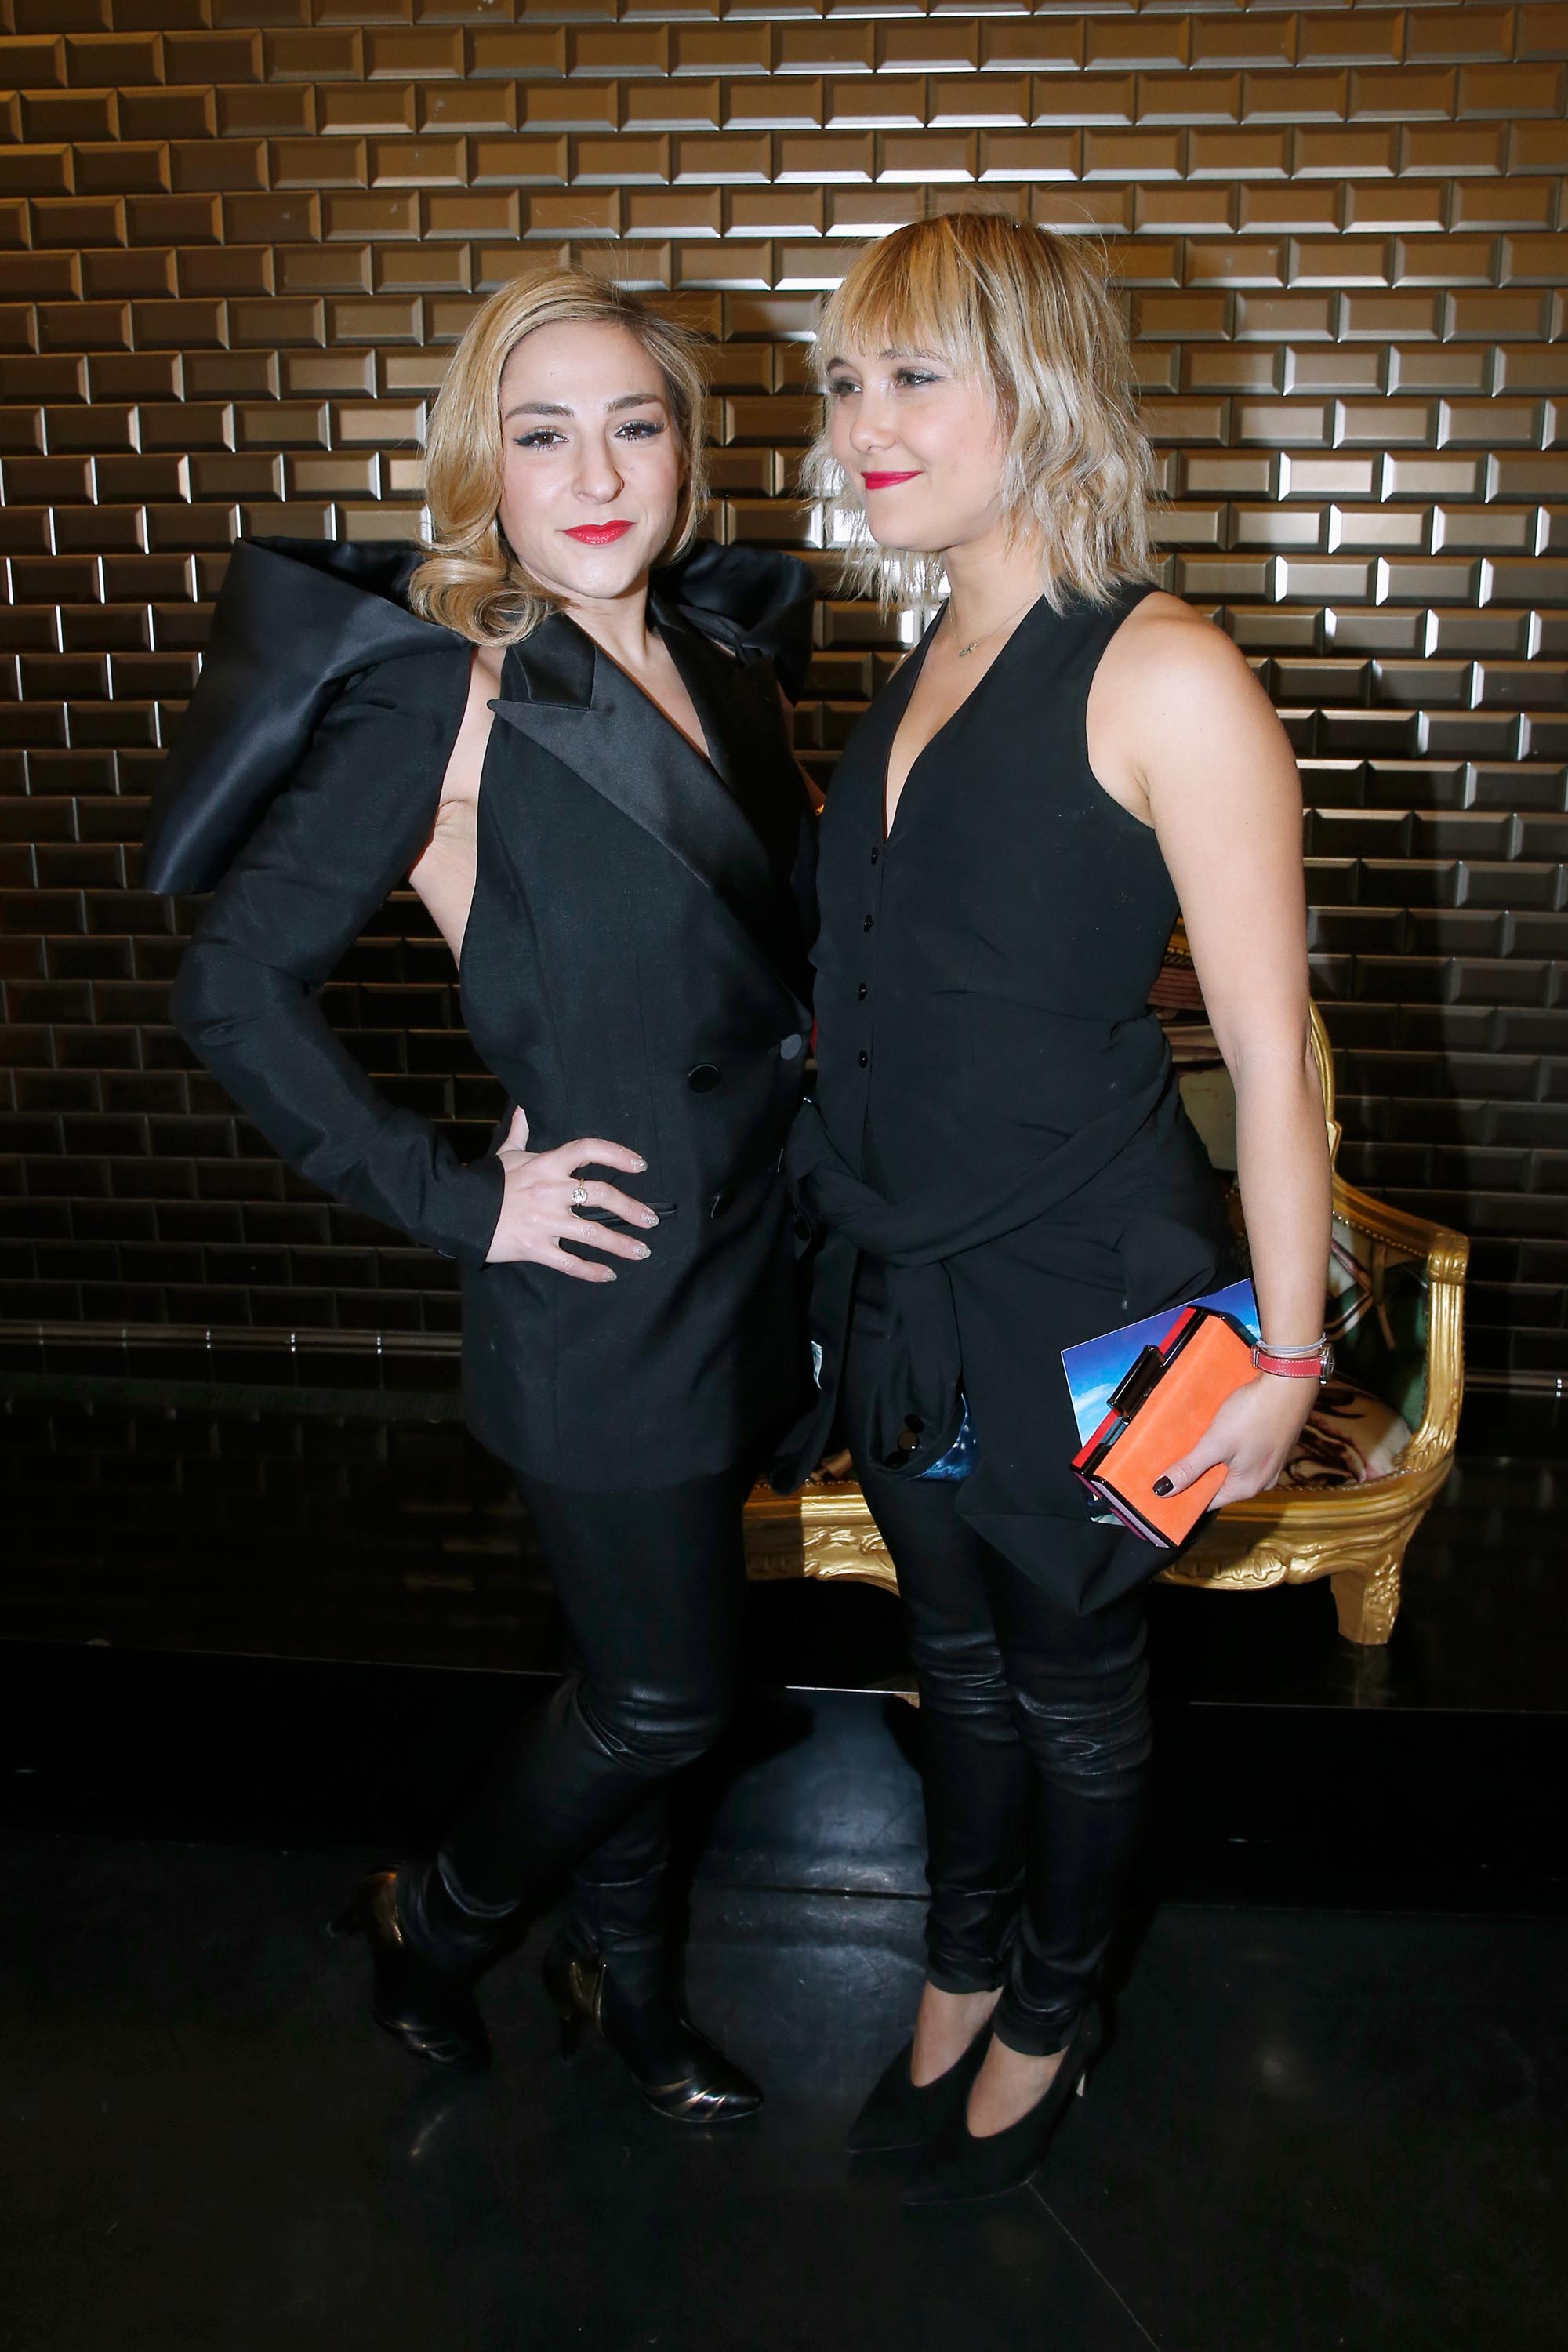 Marilou Berry & Berengere Krief attend the Jean Paul Gaultier Haute Couture Spring Summer 2017 show